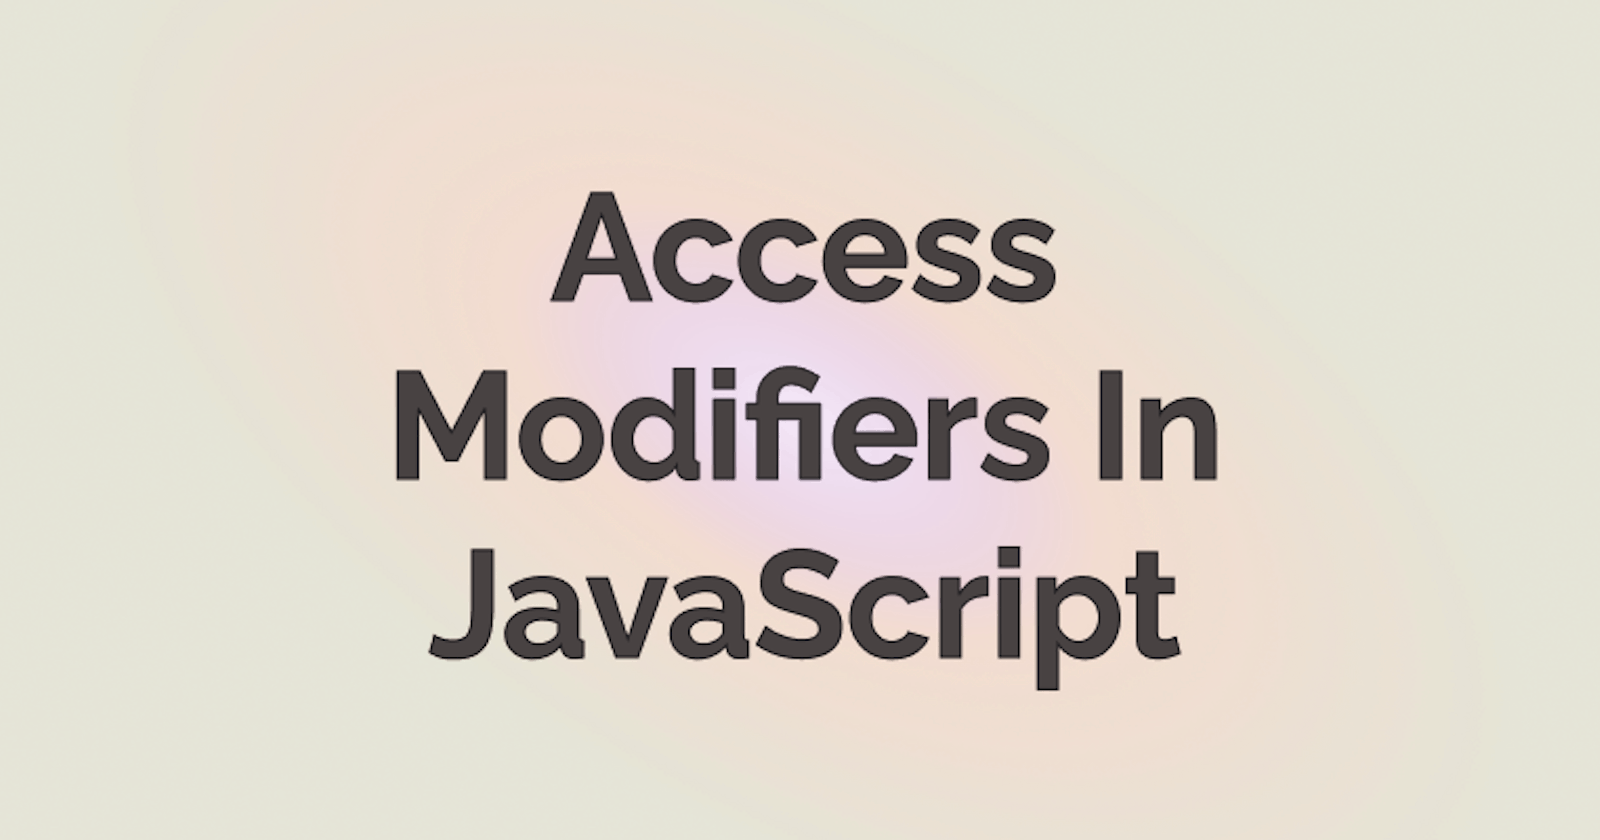 What Are Access Modifiers In JavaScript